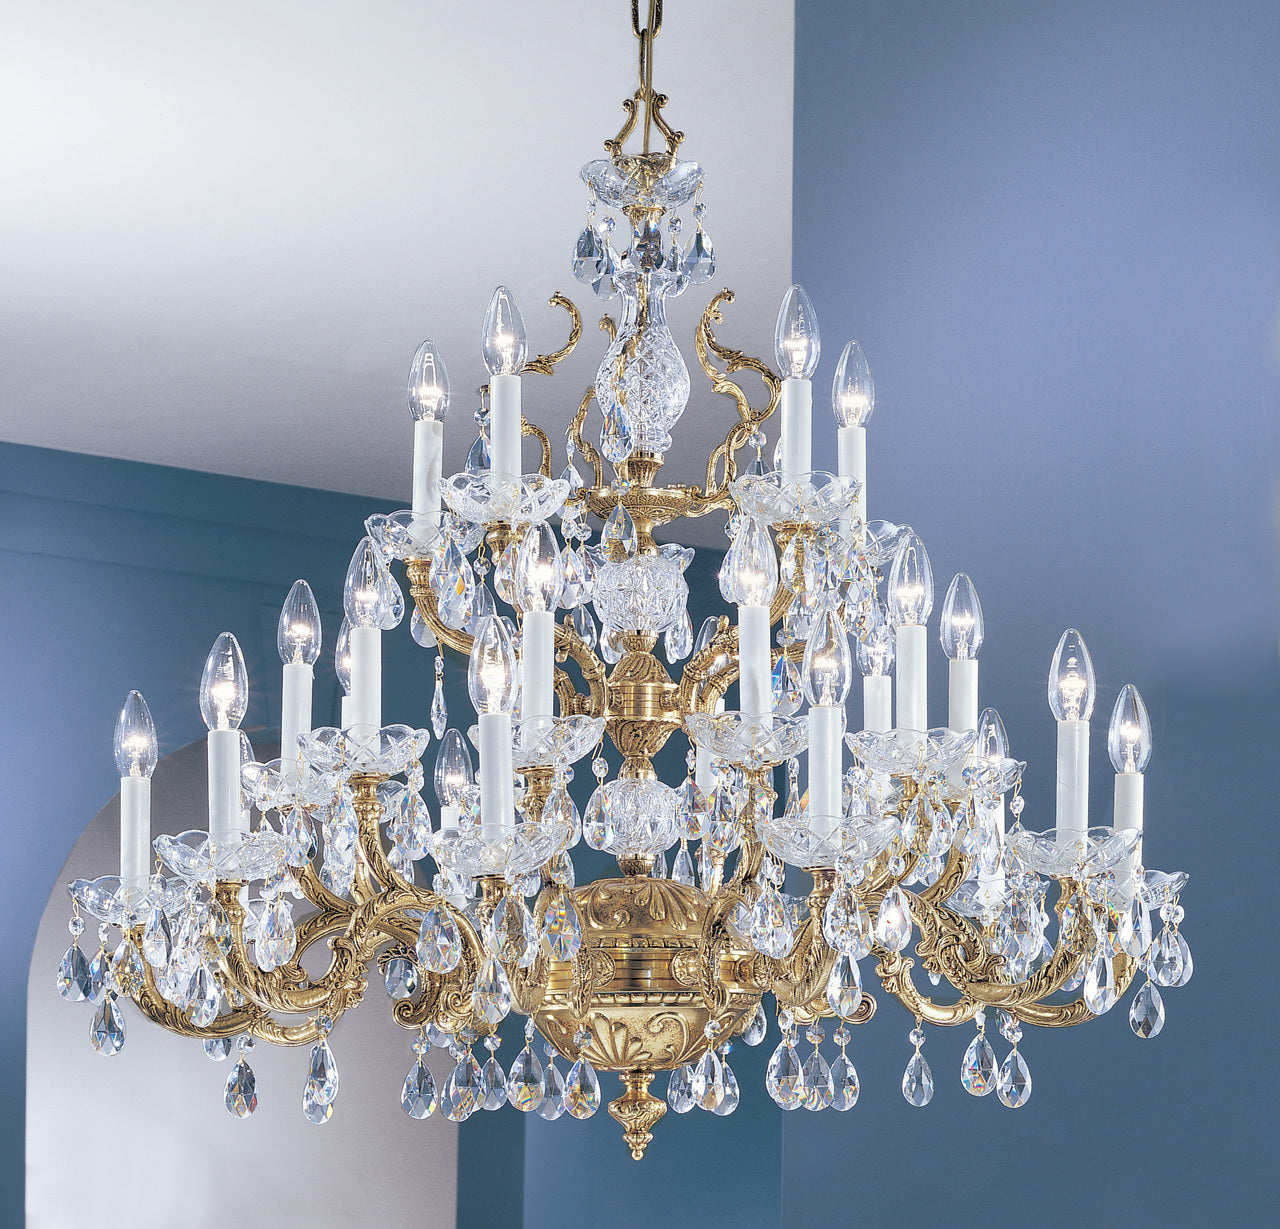 Classic Lighting 5535 OWB C Madrid Crystal/Cast Brass Chandelier in Olde World Bronze (Imported from Spain)